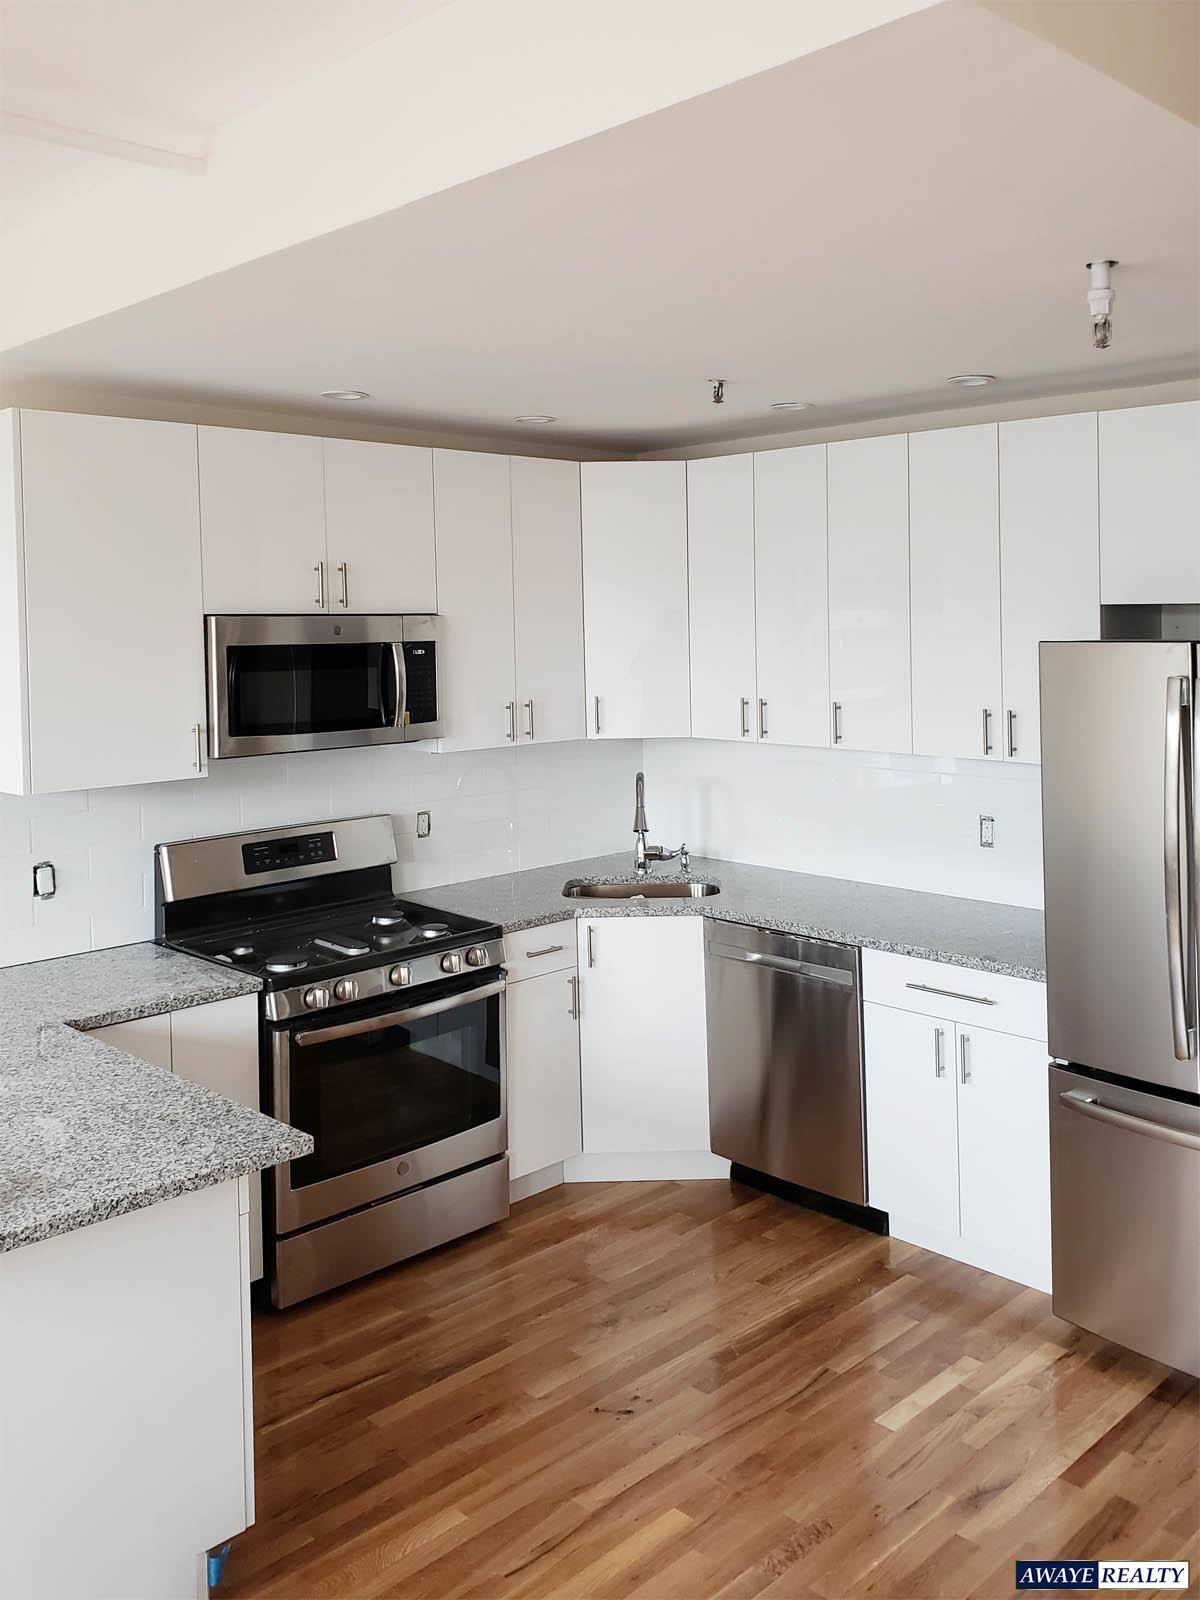 Stunning NEWLY RENOVATED bright and spacious condo style living in Historic Park Slope.